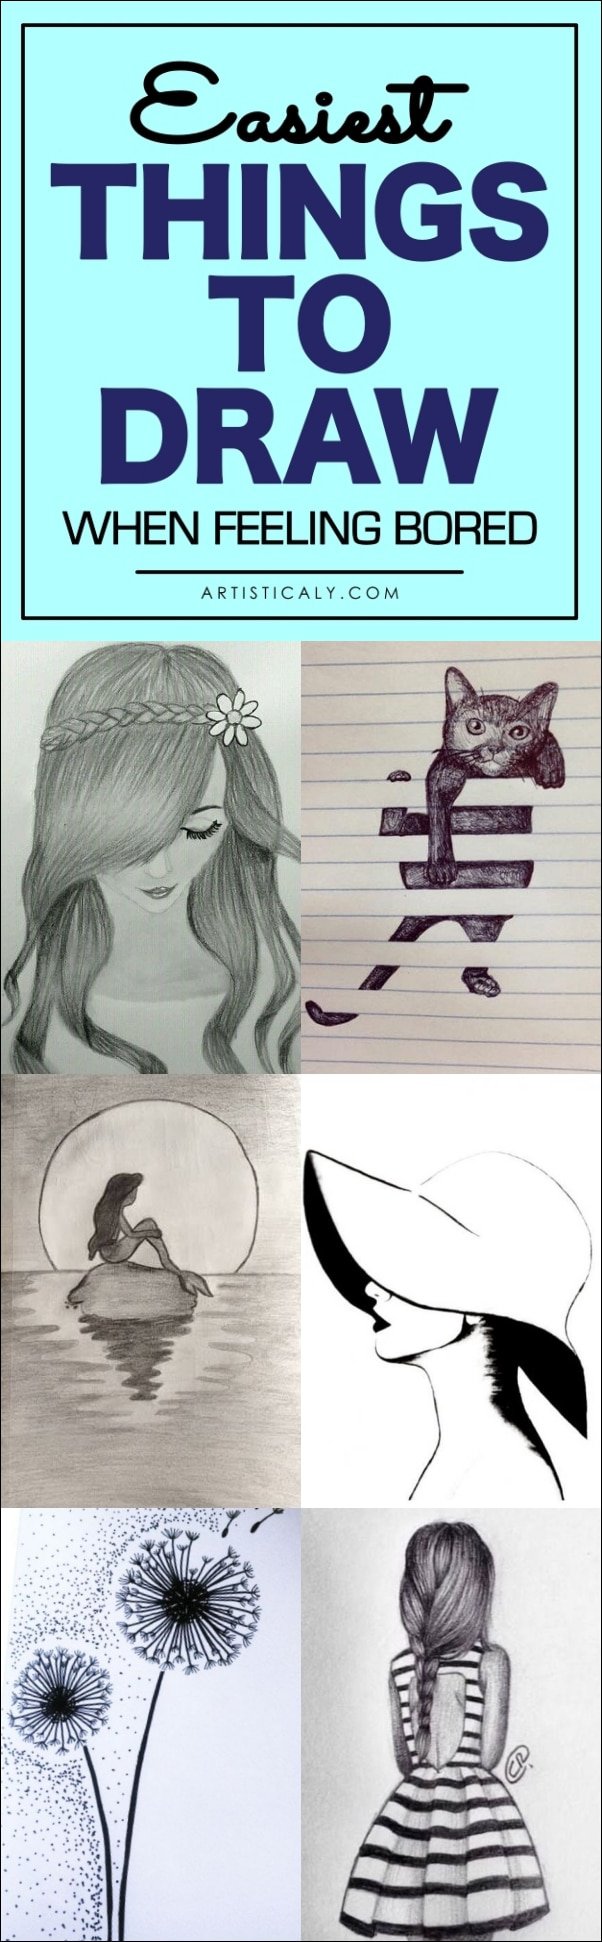 40 Easiest Things to Draw When Feeling Bored Artisticaly Inspect